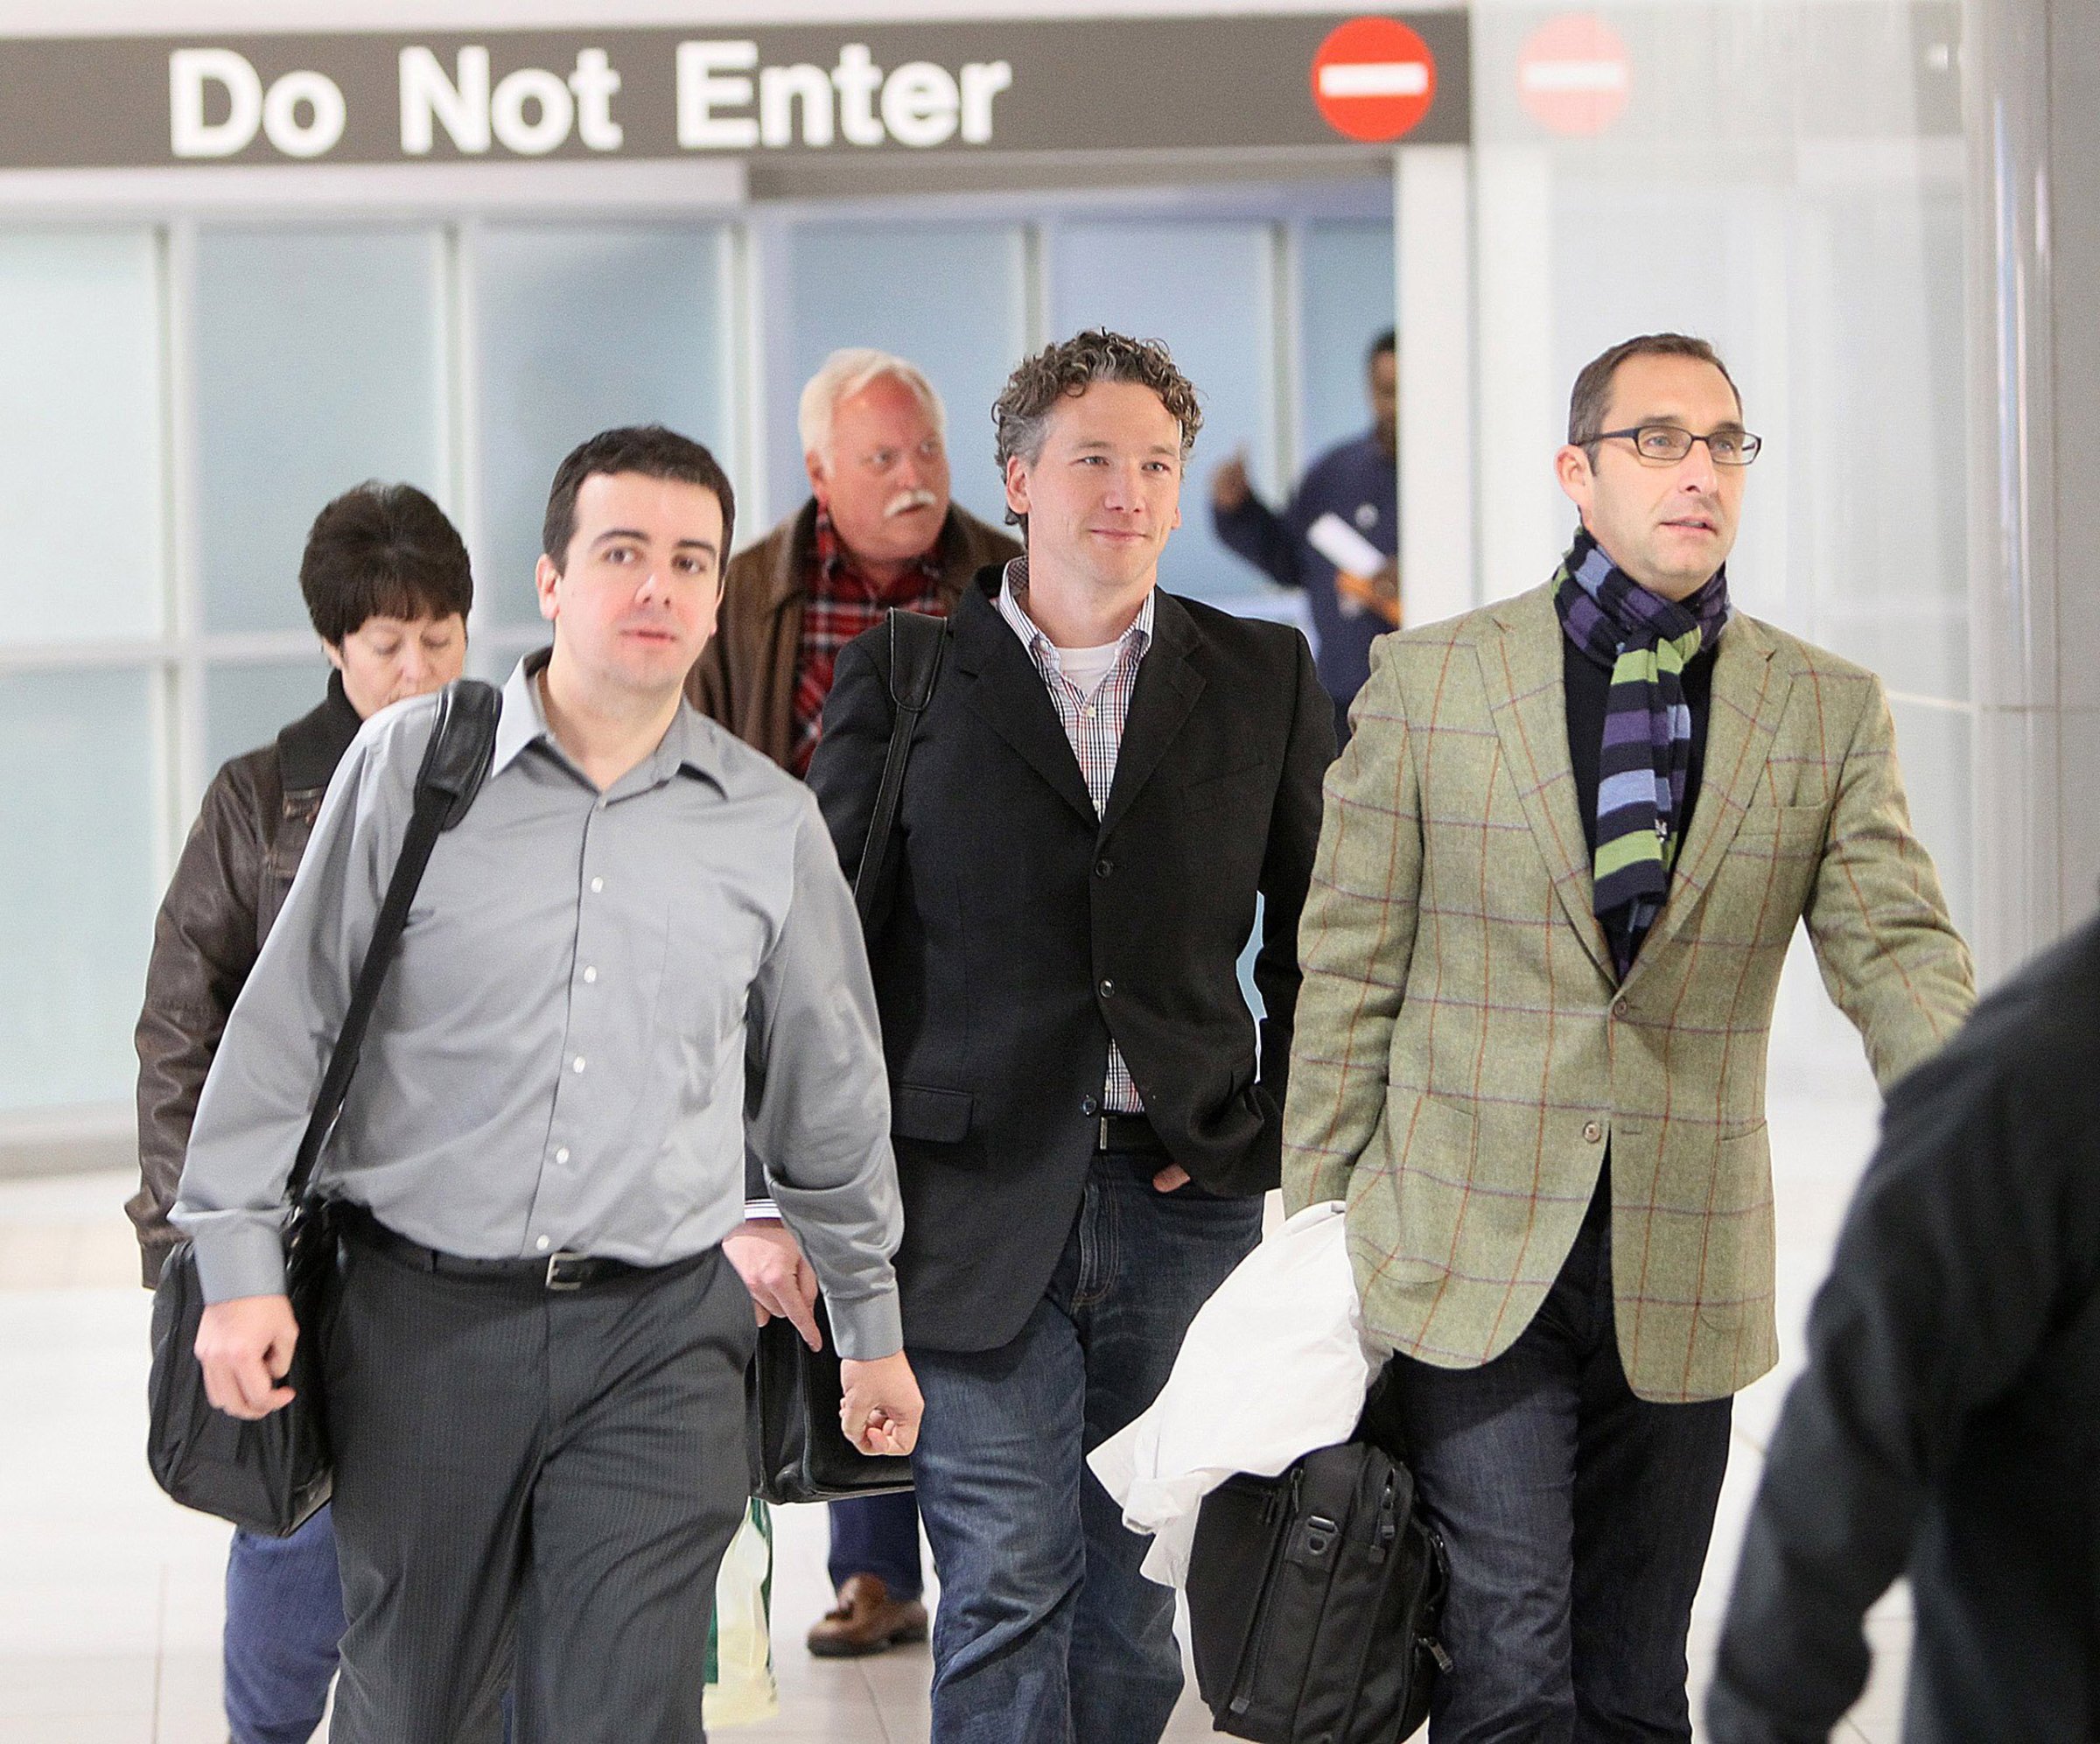 In this Dec. 8, 2011, photo, then-St. Louis Cardinals scouting director Christopher Correa, left, assistant general manager Mike Girsch, center, and general manager John Mozeliak, right, arrive at Lambert-St. Louis International Airport in St. Louis, Mo., from the baseball winter meetings in Dallas. The former scouting director of the St. Louis Cardinals has pleaded guilty in federal court to hacking the Houston Astros' player personnel database. Christopher Correa pleaded guilty Friday, Jan. 8, 2016, to five counts of unauthorized access of a protected computer, access authorities said dated back several years. The 35-year-old Correa was the Cardinals' director of baseball development until he was fired last summer. (Chris Lee/St. Louis Post-Dispatch via AP) EDWARDSVILLE INTELLIGENCER OUT; THE ALTON TELEGRAPH OUT; MANDATORY CREDIT